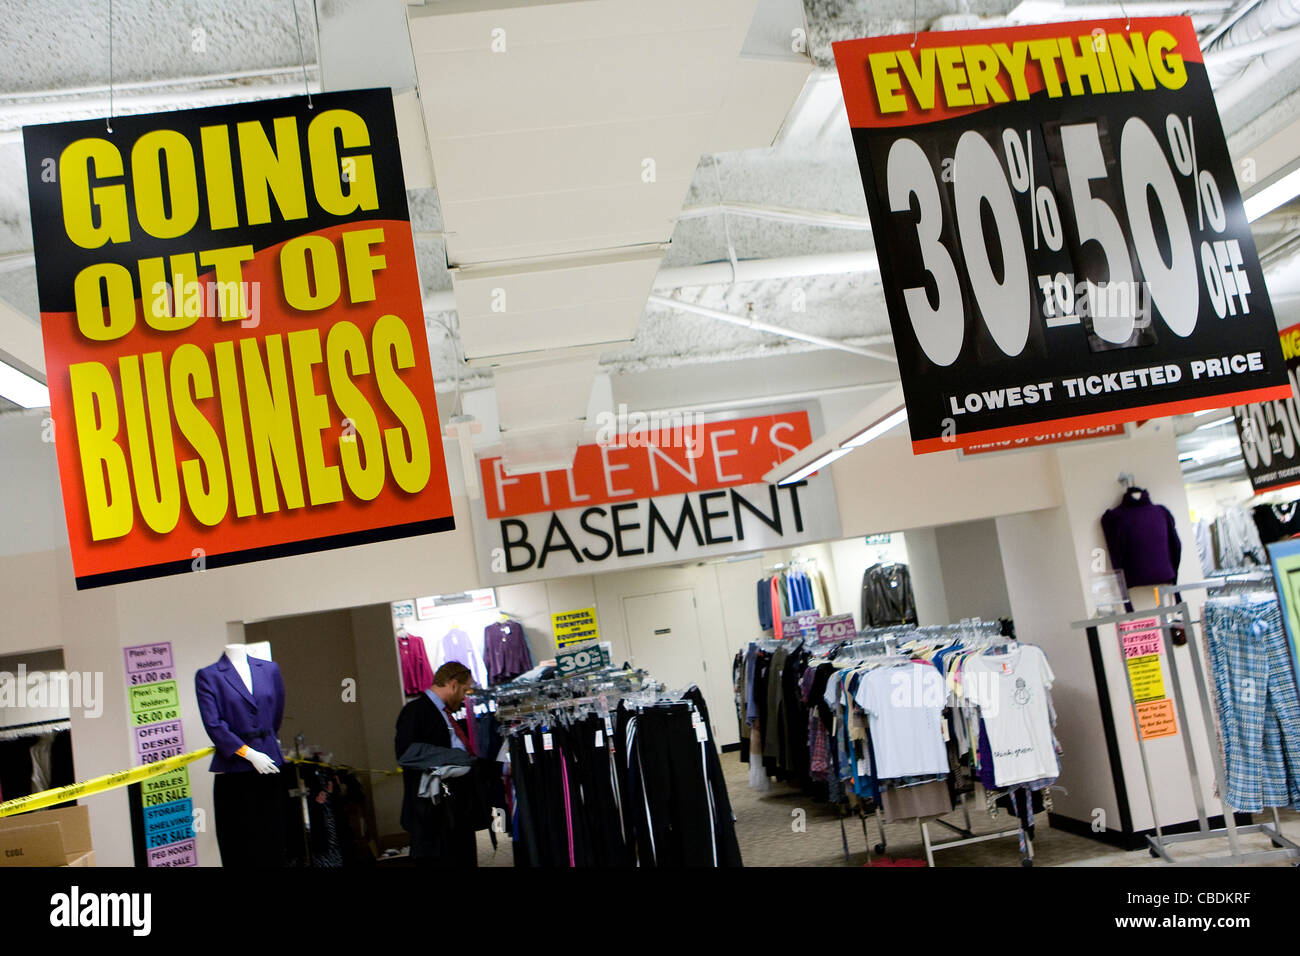 A Filene's Basement store going out of business sale. Stock Photo